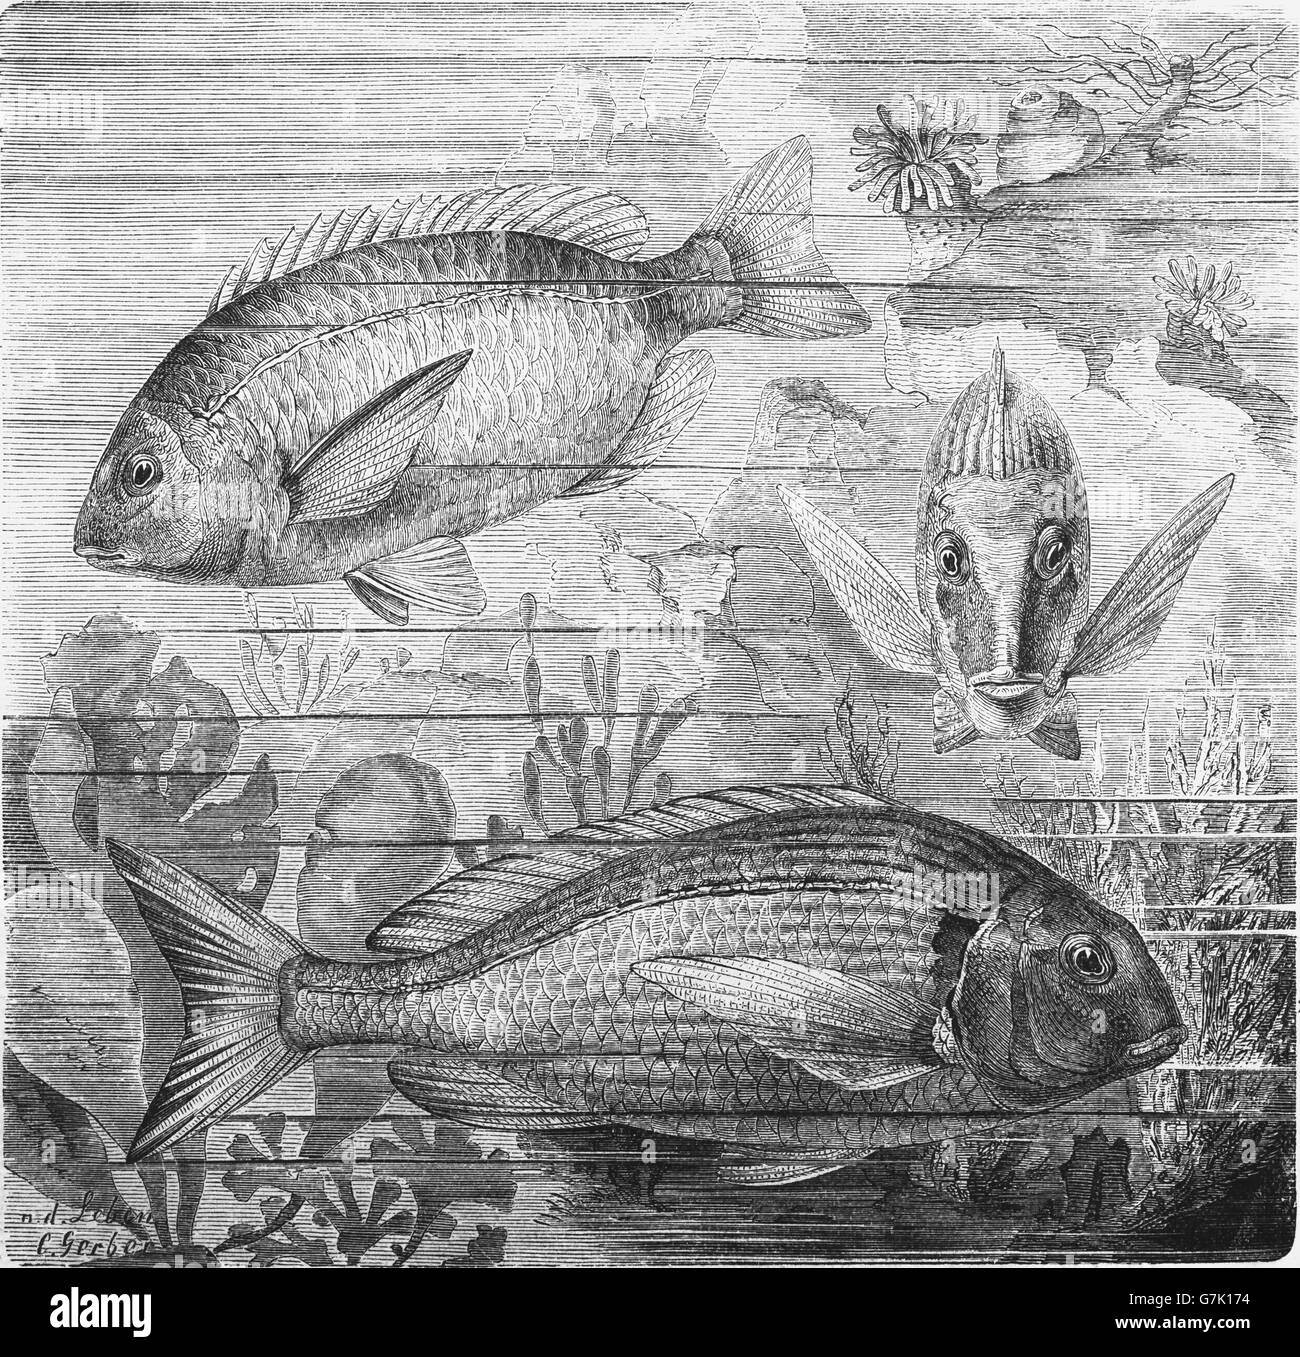 Annular sea bream, Diplodus annularis and Australasian snapper, silver seabream, Pagrus auratus, illustration from book dated 19 Stock Photo